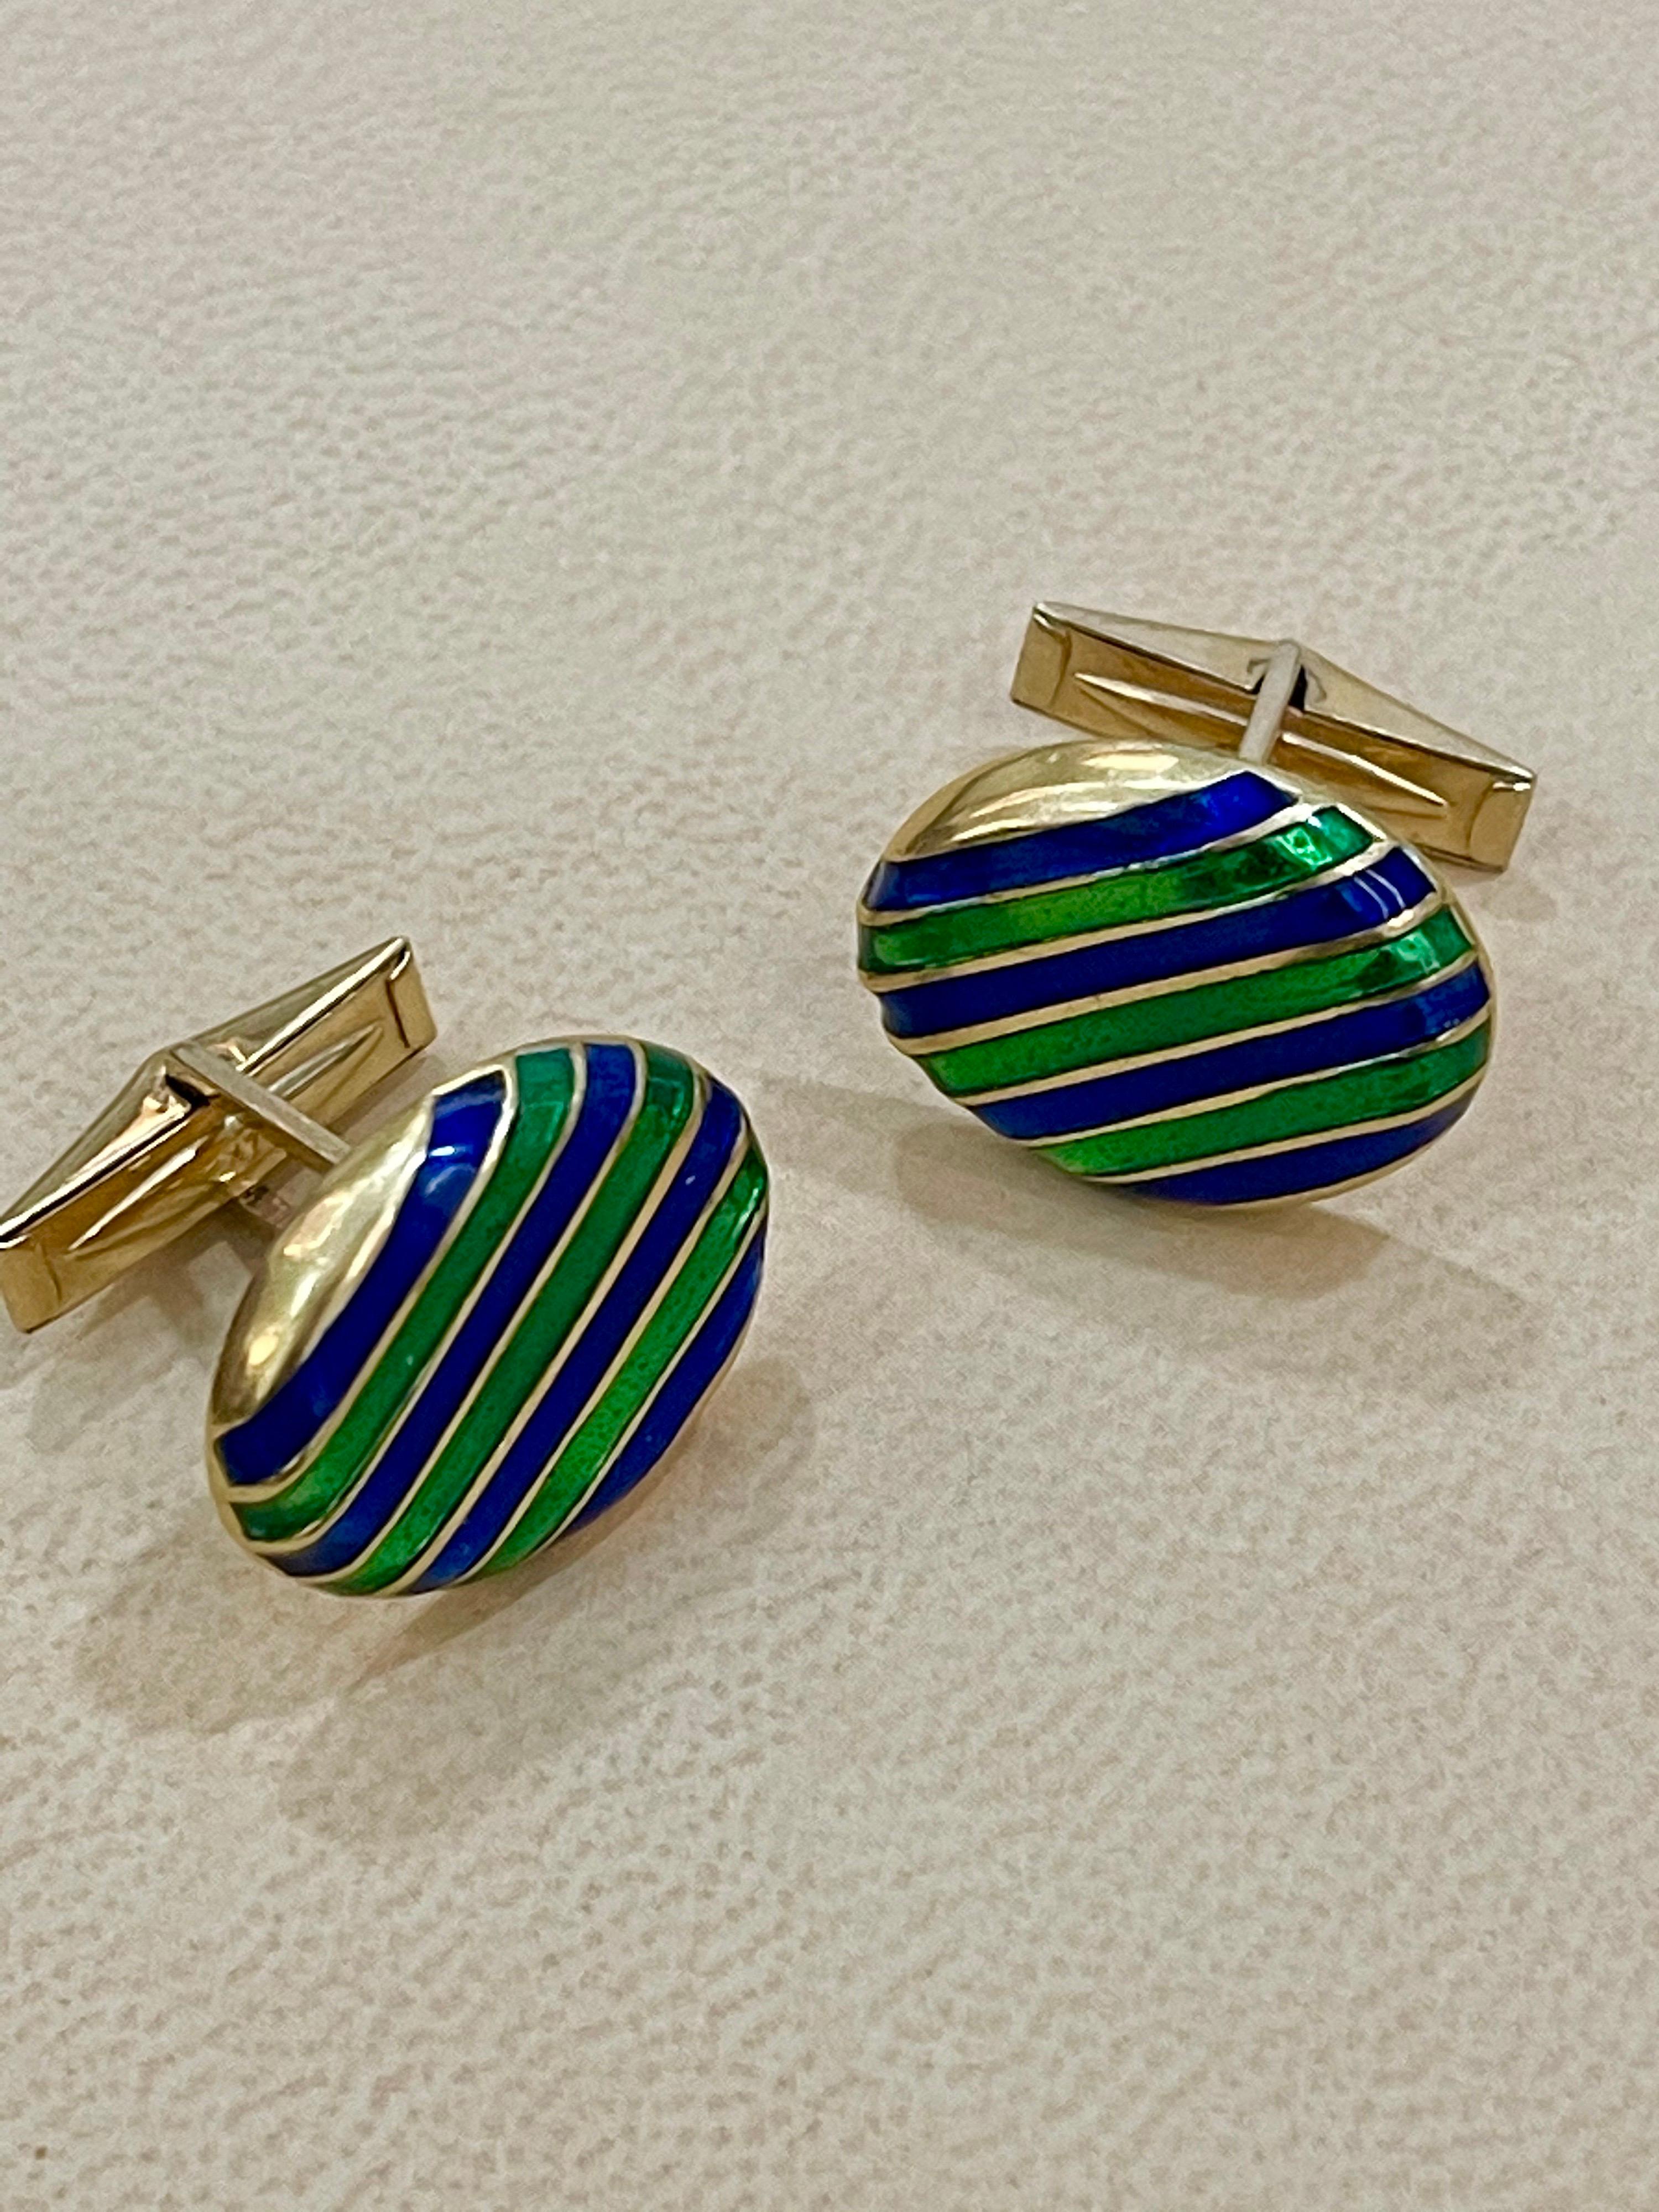 Blue Green Enamel Oval Cufflinks in 14 Karat Yellow Gold 15.5 Gm, Men's In Excellent Condition For Sale In New York, NY